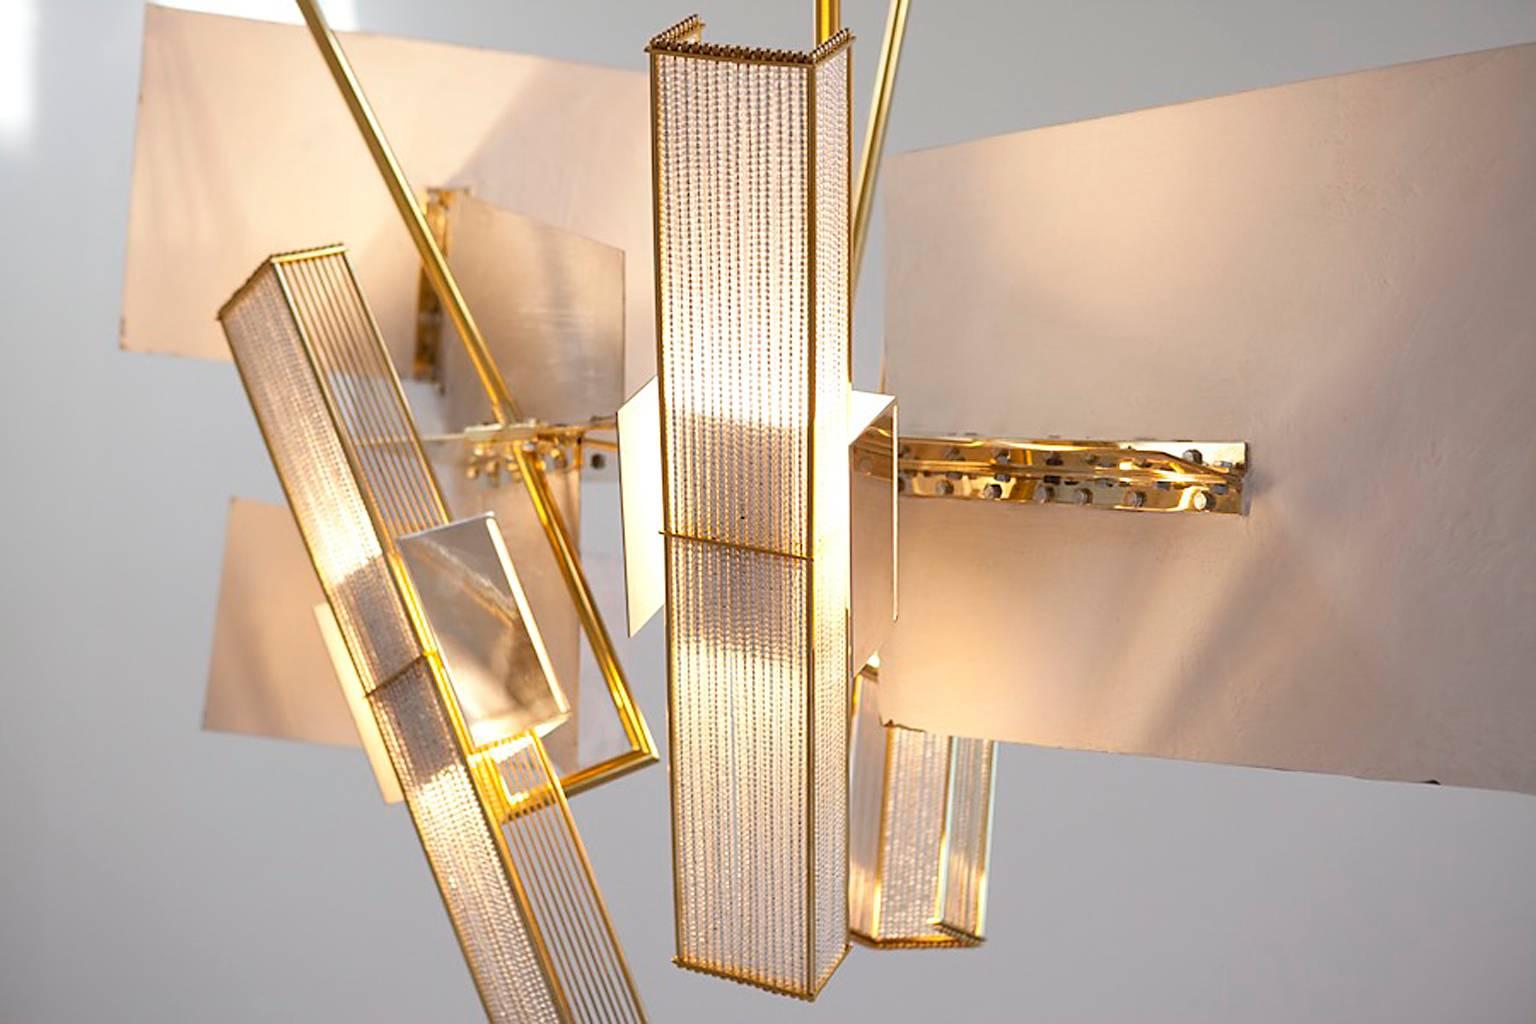 This one-of-a-kind light sculpture was created as the focal point for an ultra modern penthouse apartment in New York. Using fine Japanese mirror beads, this piece incorporates silver and gold plated details and has an industrial yet tailored